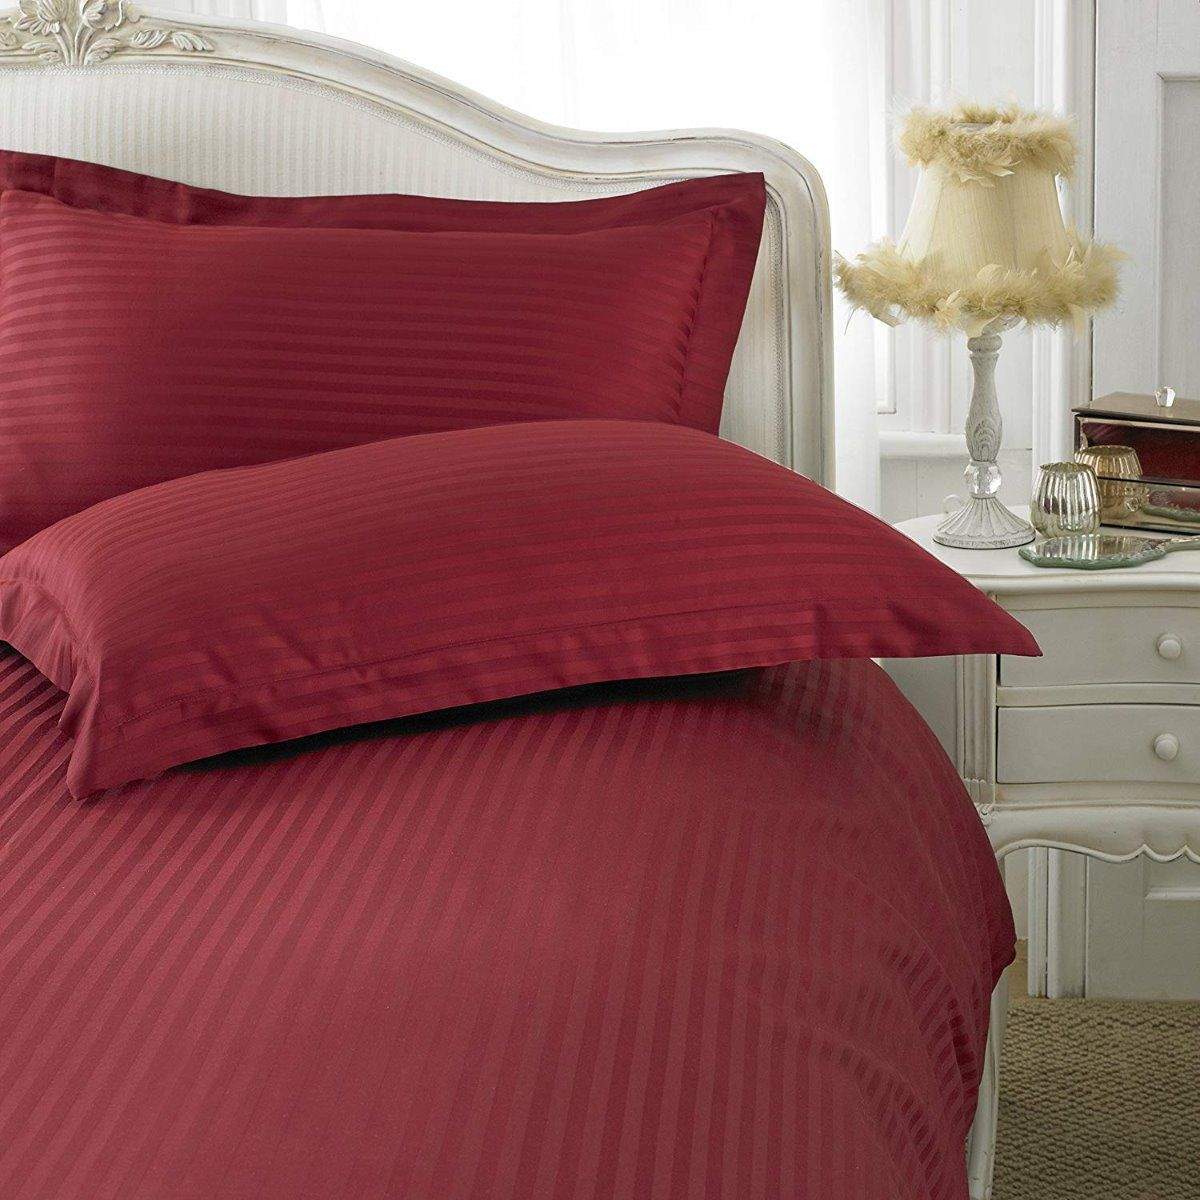 250 Thread Count Egyptian Cotton Sateen Stripe Duvet Cover Set Bed and Bath Linen